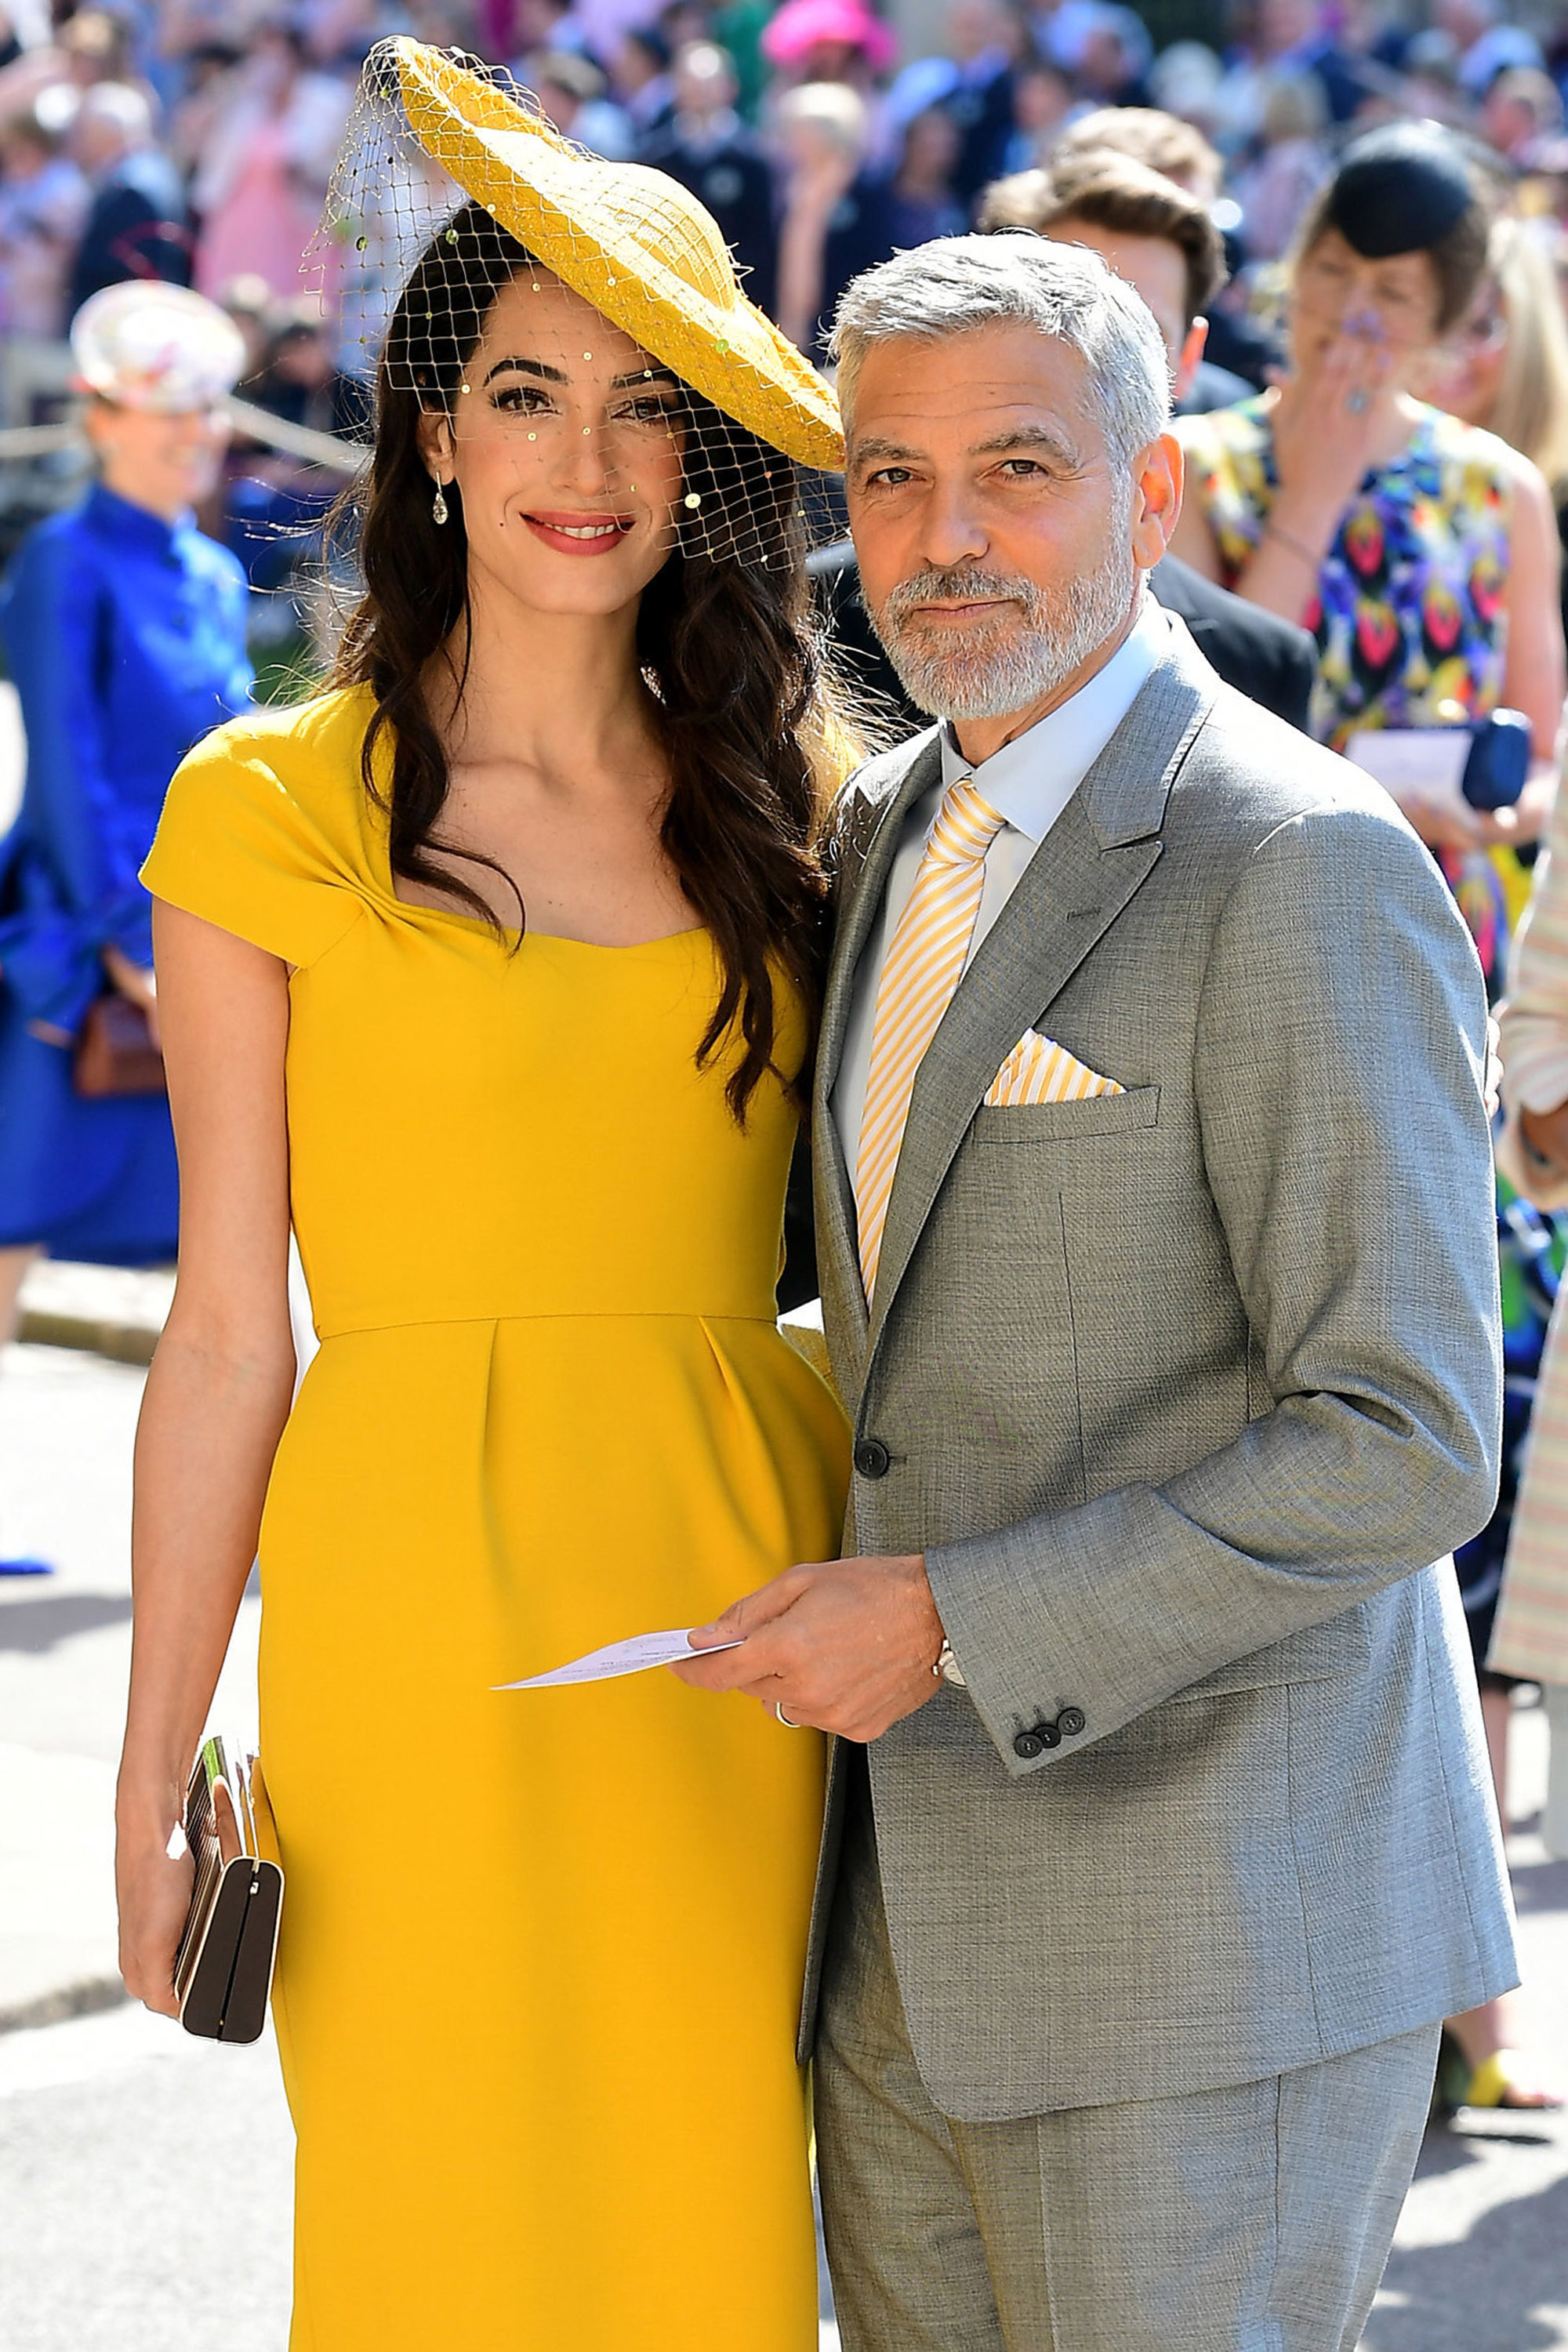 Amal and George Clooney at the wedding of Prince Harry to Meghan Markle on May 19, 2018 in Windsor, England | Source: Getty Images